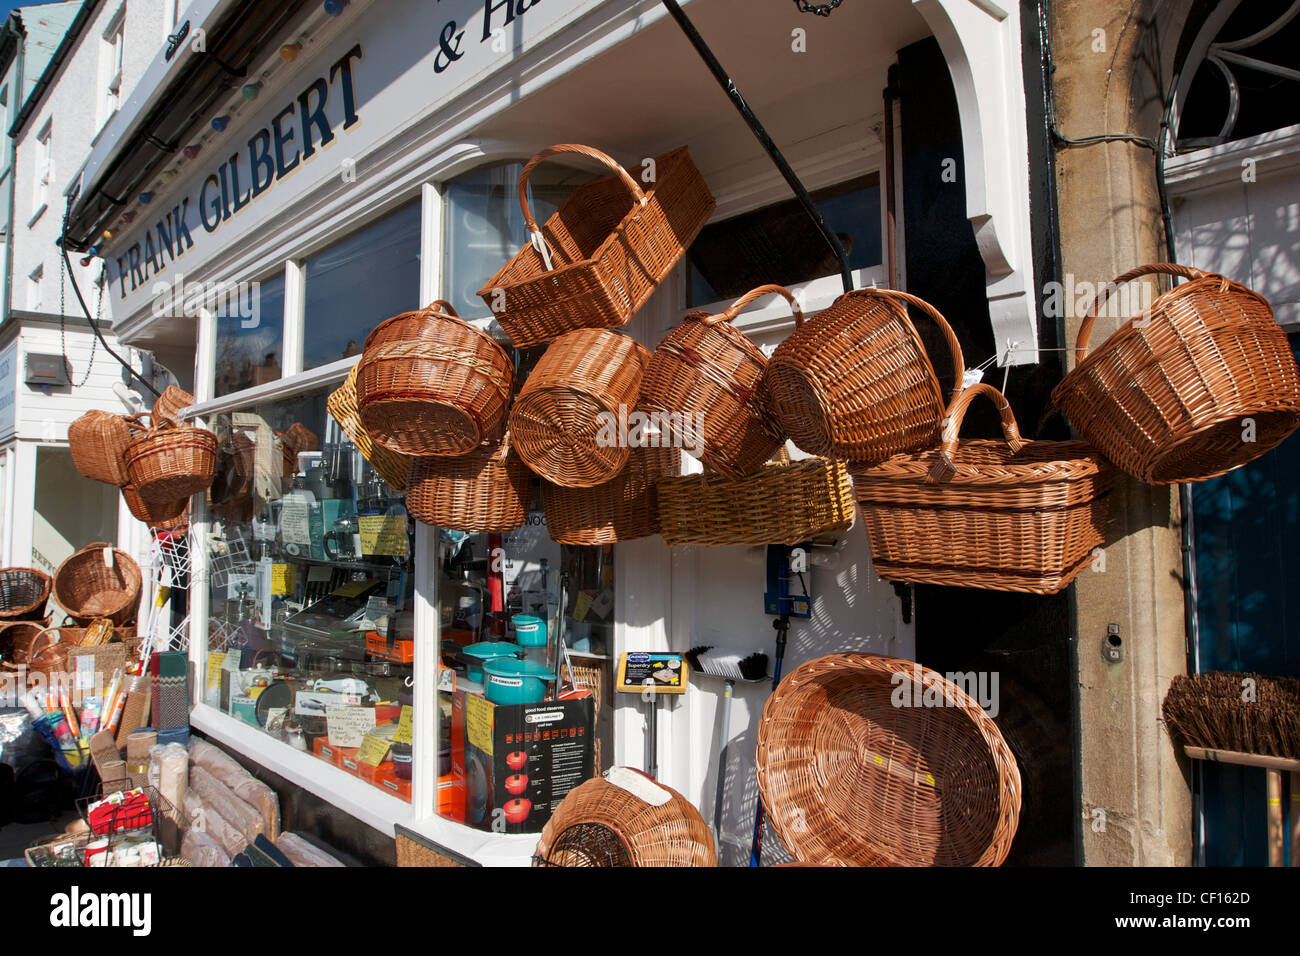 Wicker baskets hanging outside in a shop front display Stock Photo